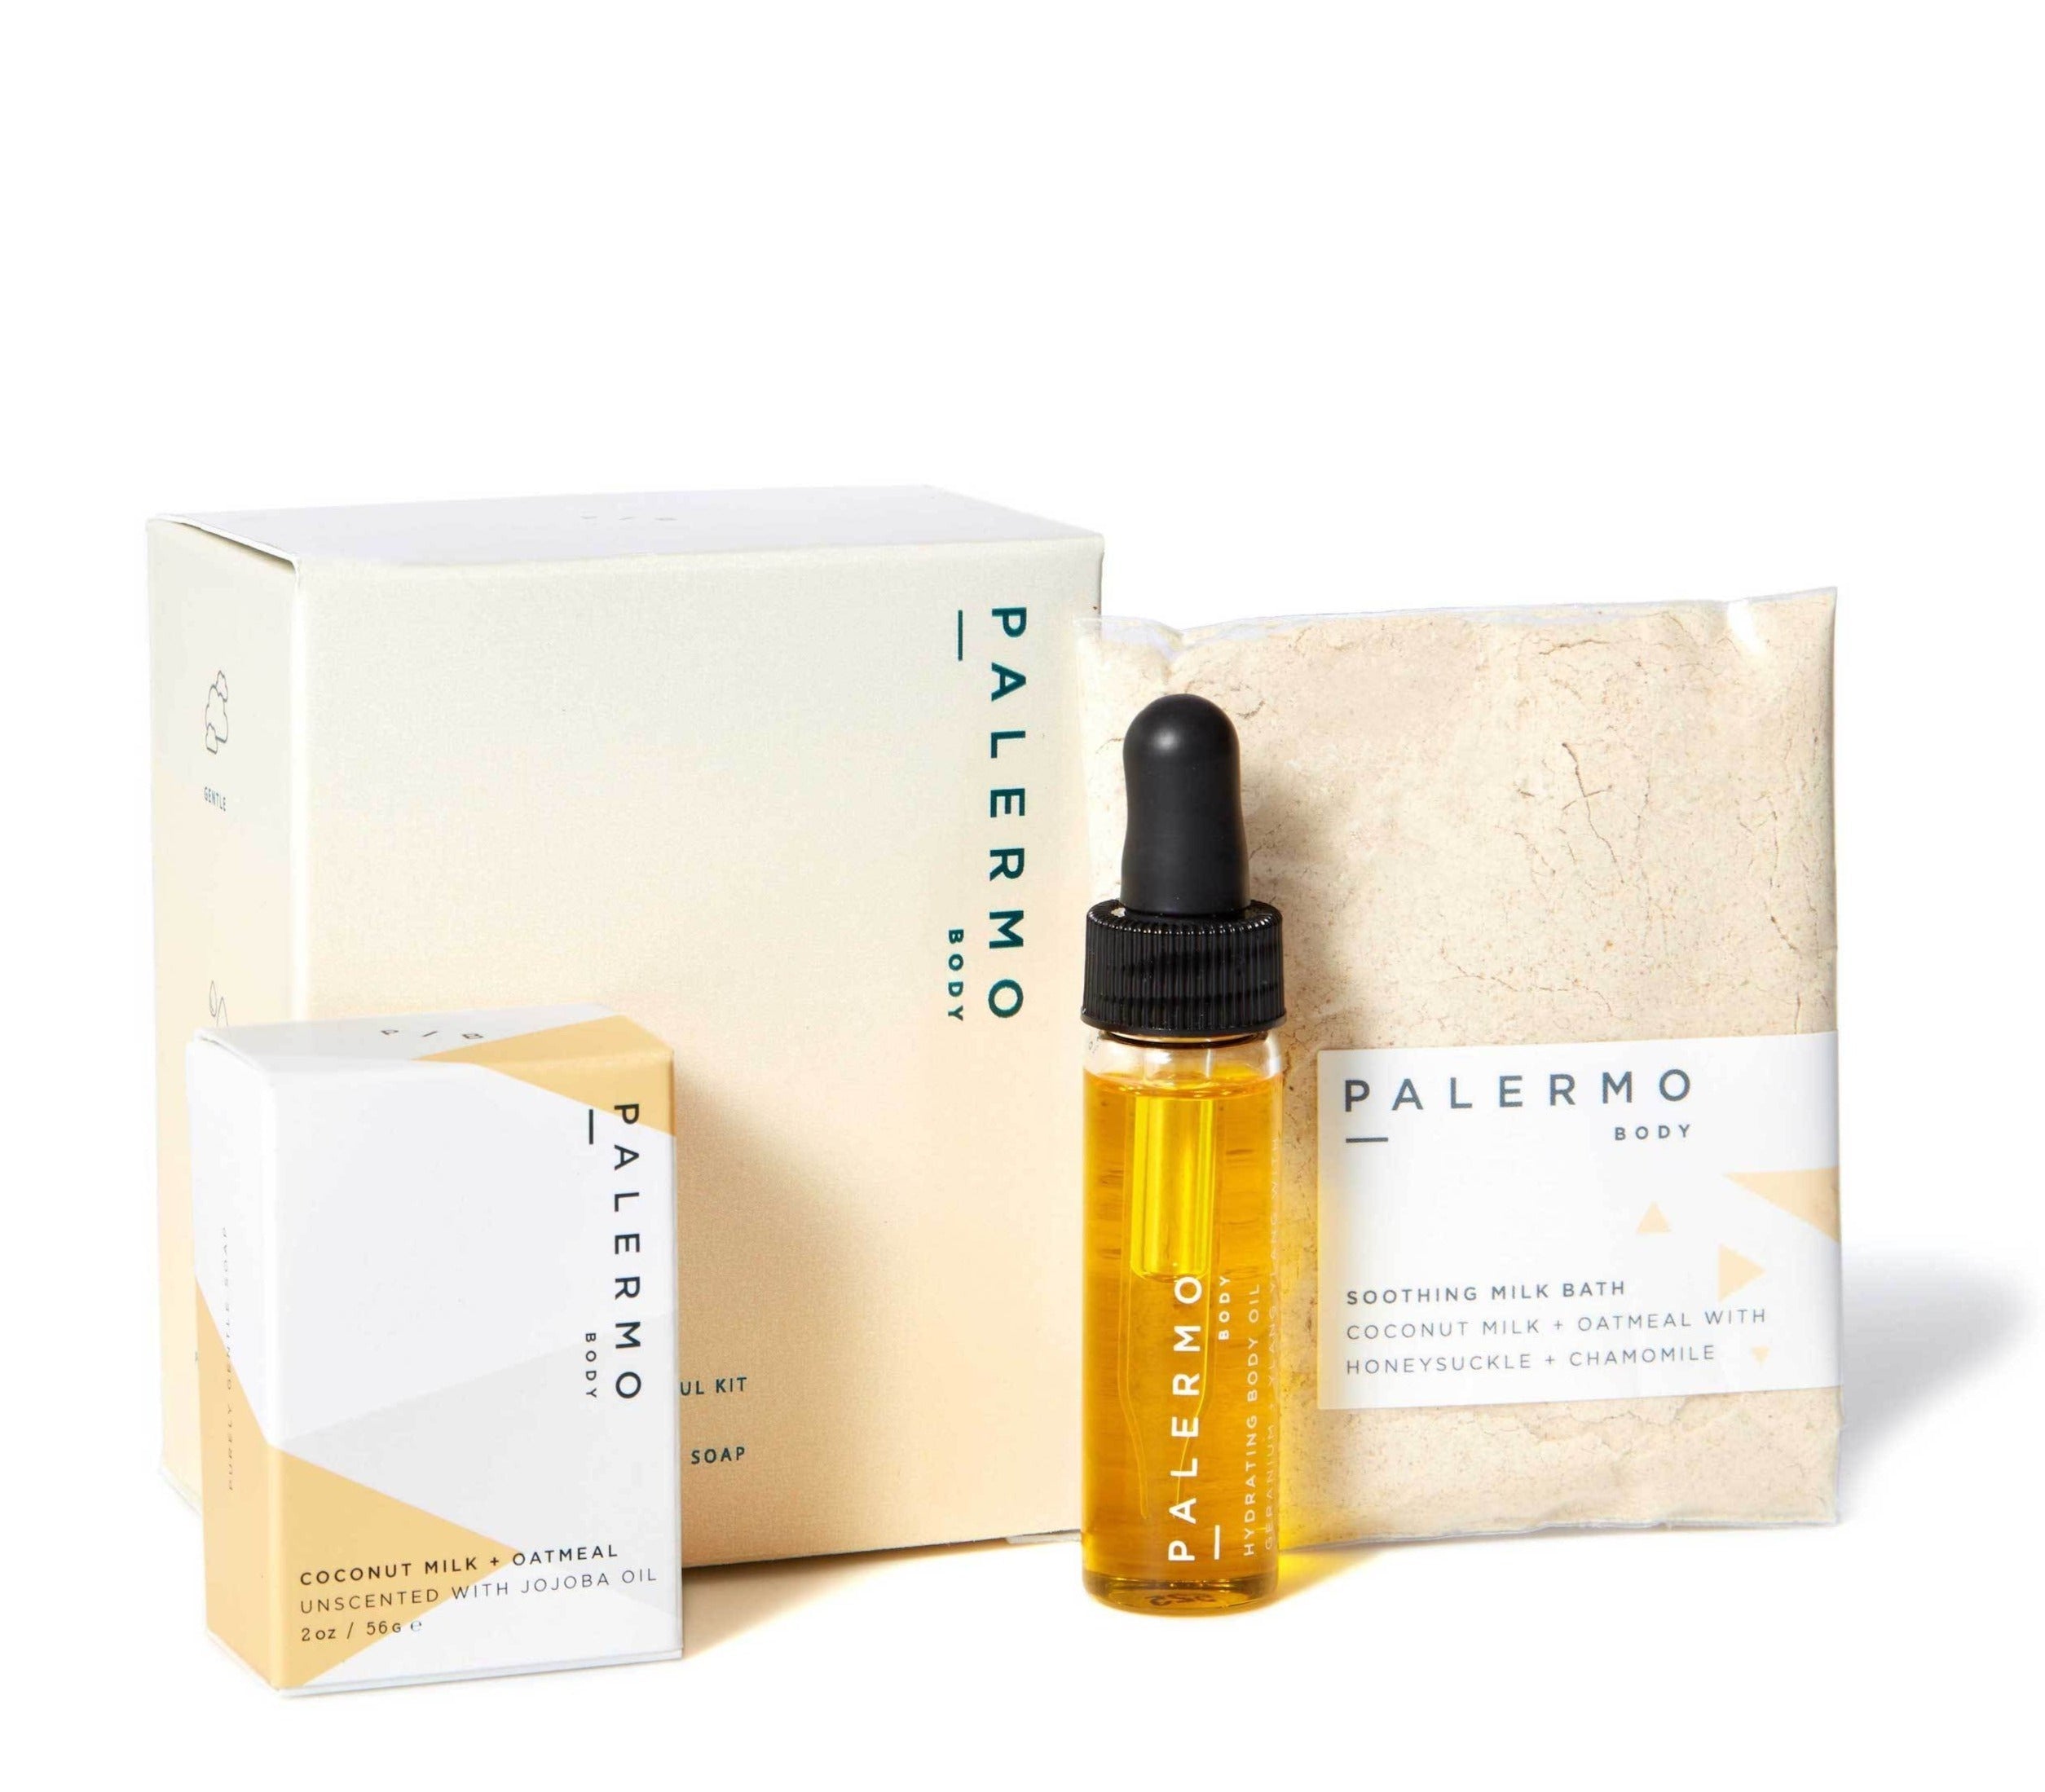  Soothe + Hydrate Mindful Kit by Palermo Body Palermo Body Perfumarie